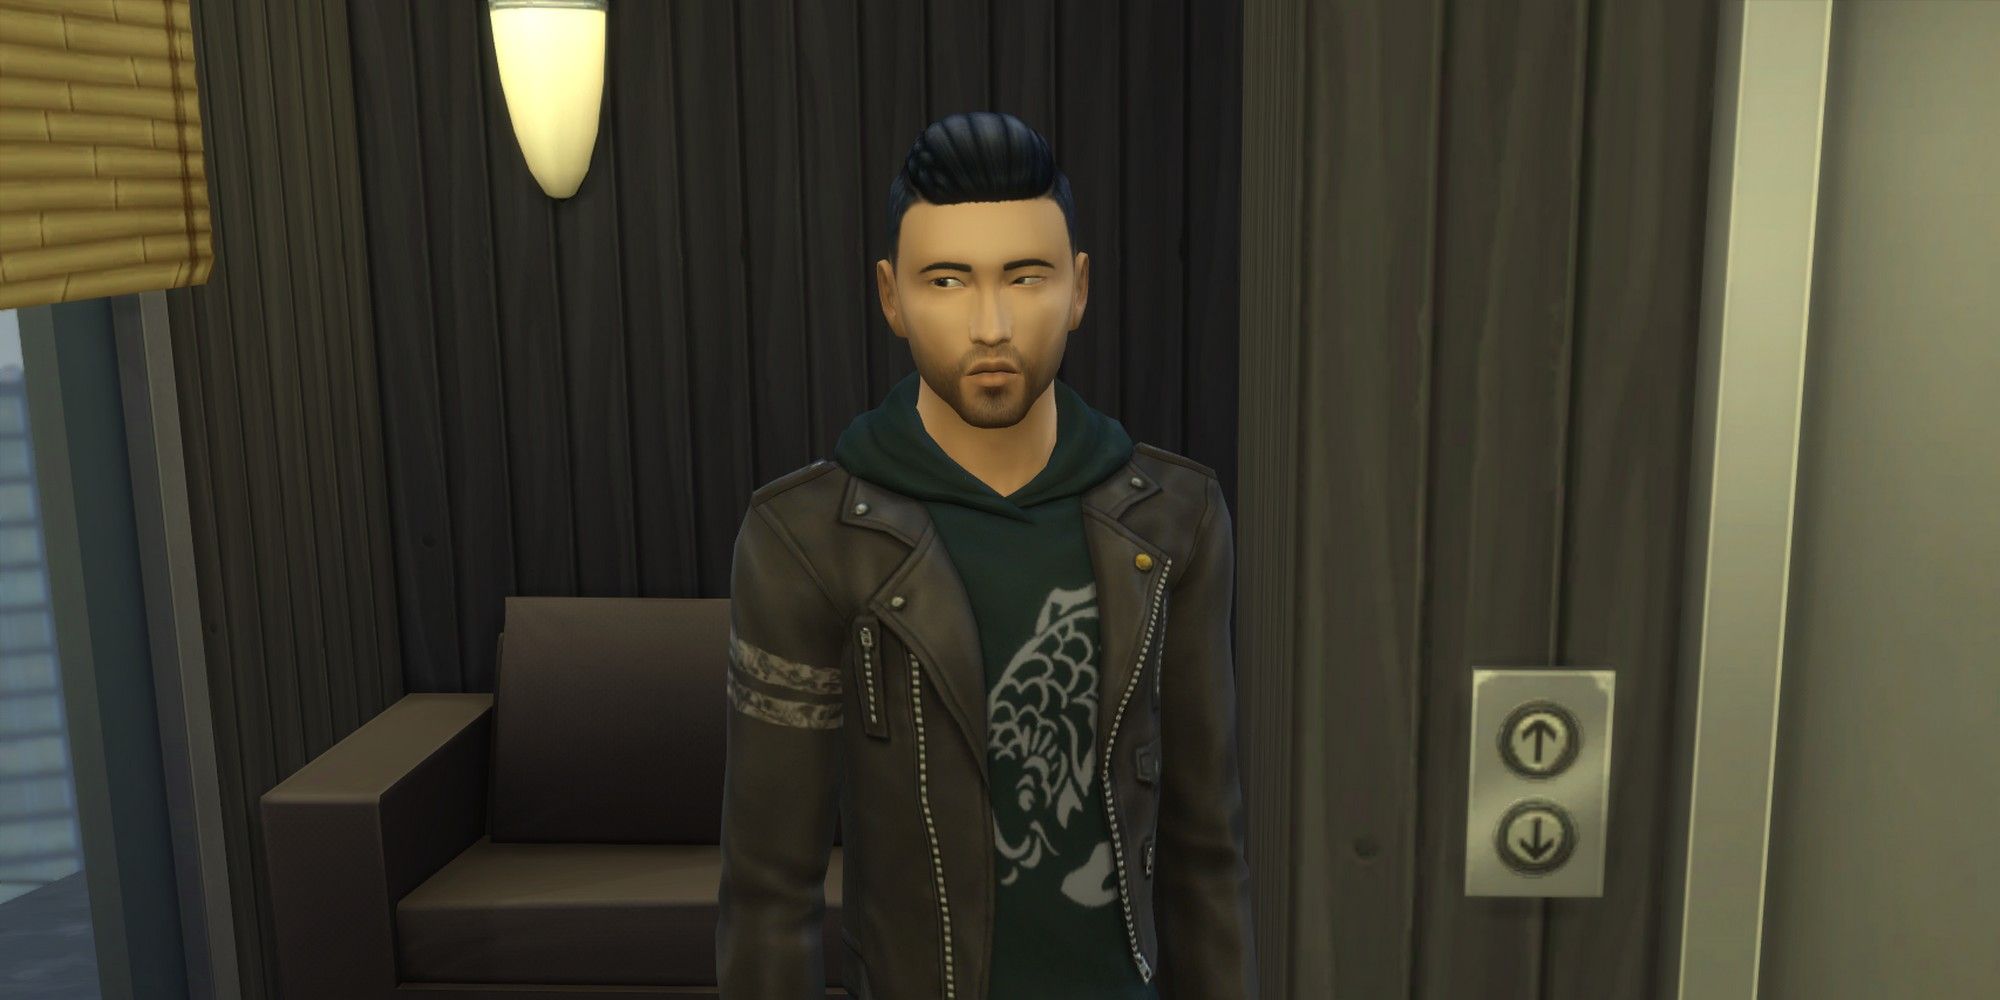 akira kibo in the hallway of his apartment building in city living san myshuno townies sims 4 best townies to marry